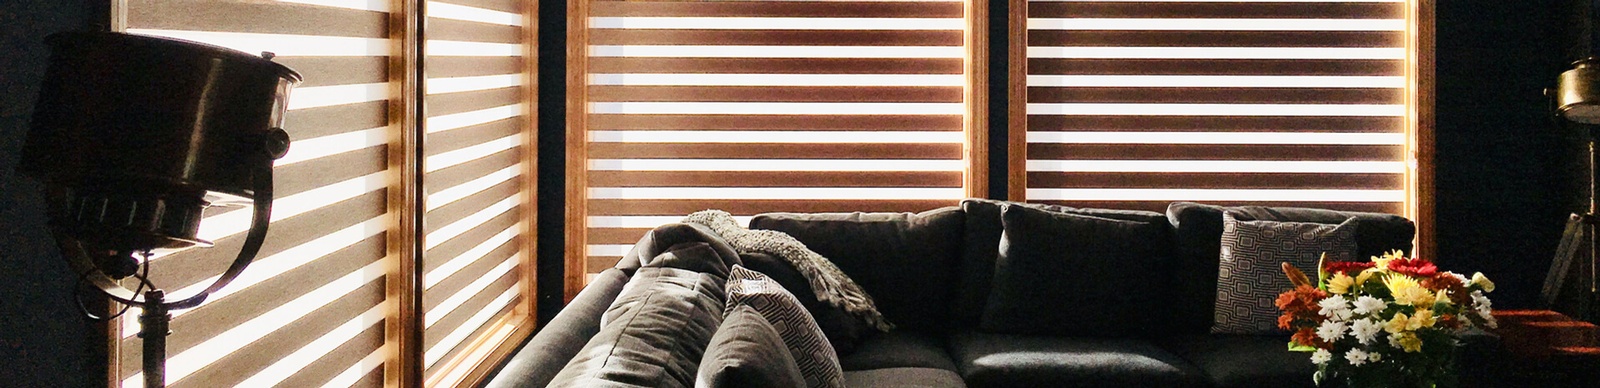 Winco Blinds & Window Fashion - Local window shades and blinds showroom based in Edmonton